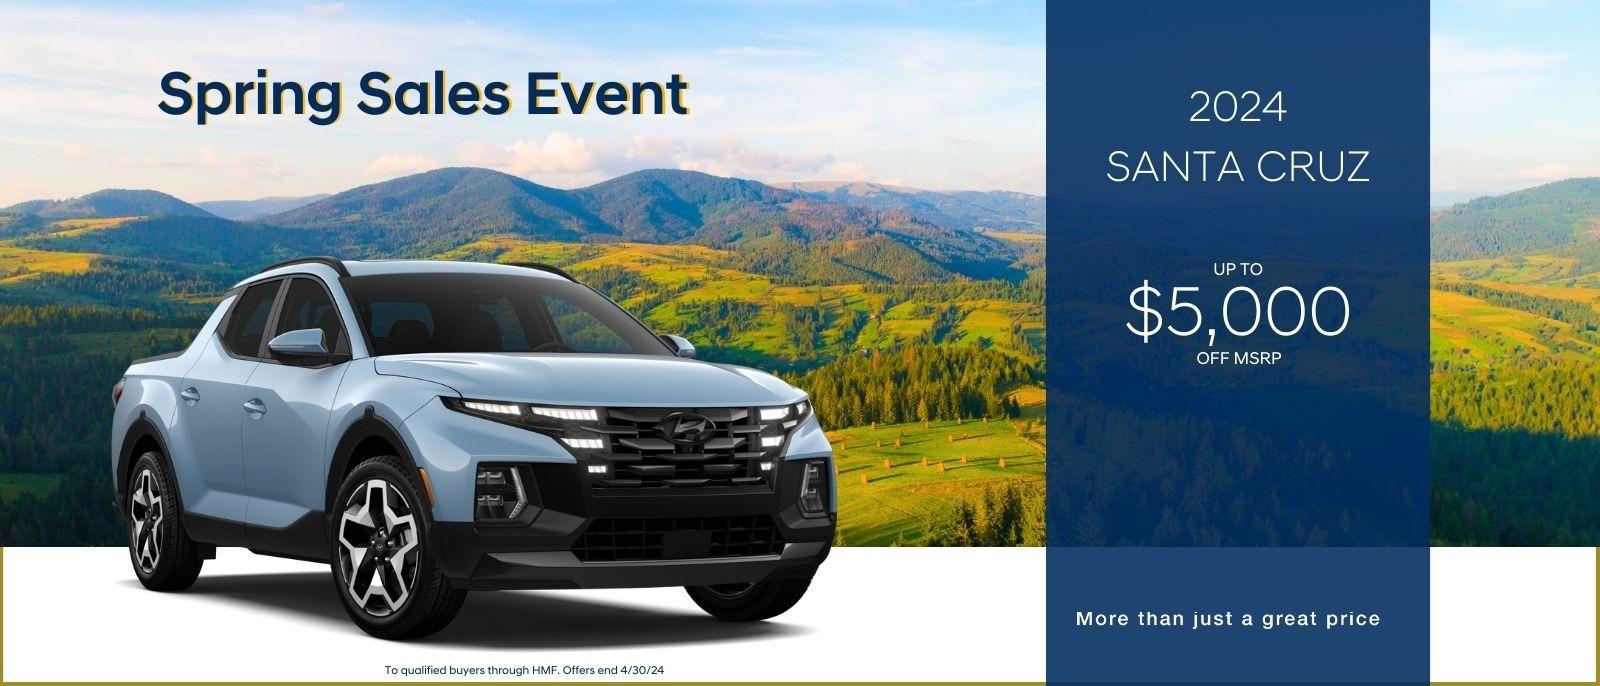 Spring Sales Event 

2024 Santa Cruz
Up to $5,000 off MSRP

More than just a great price